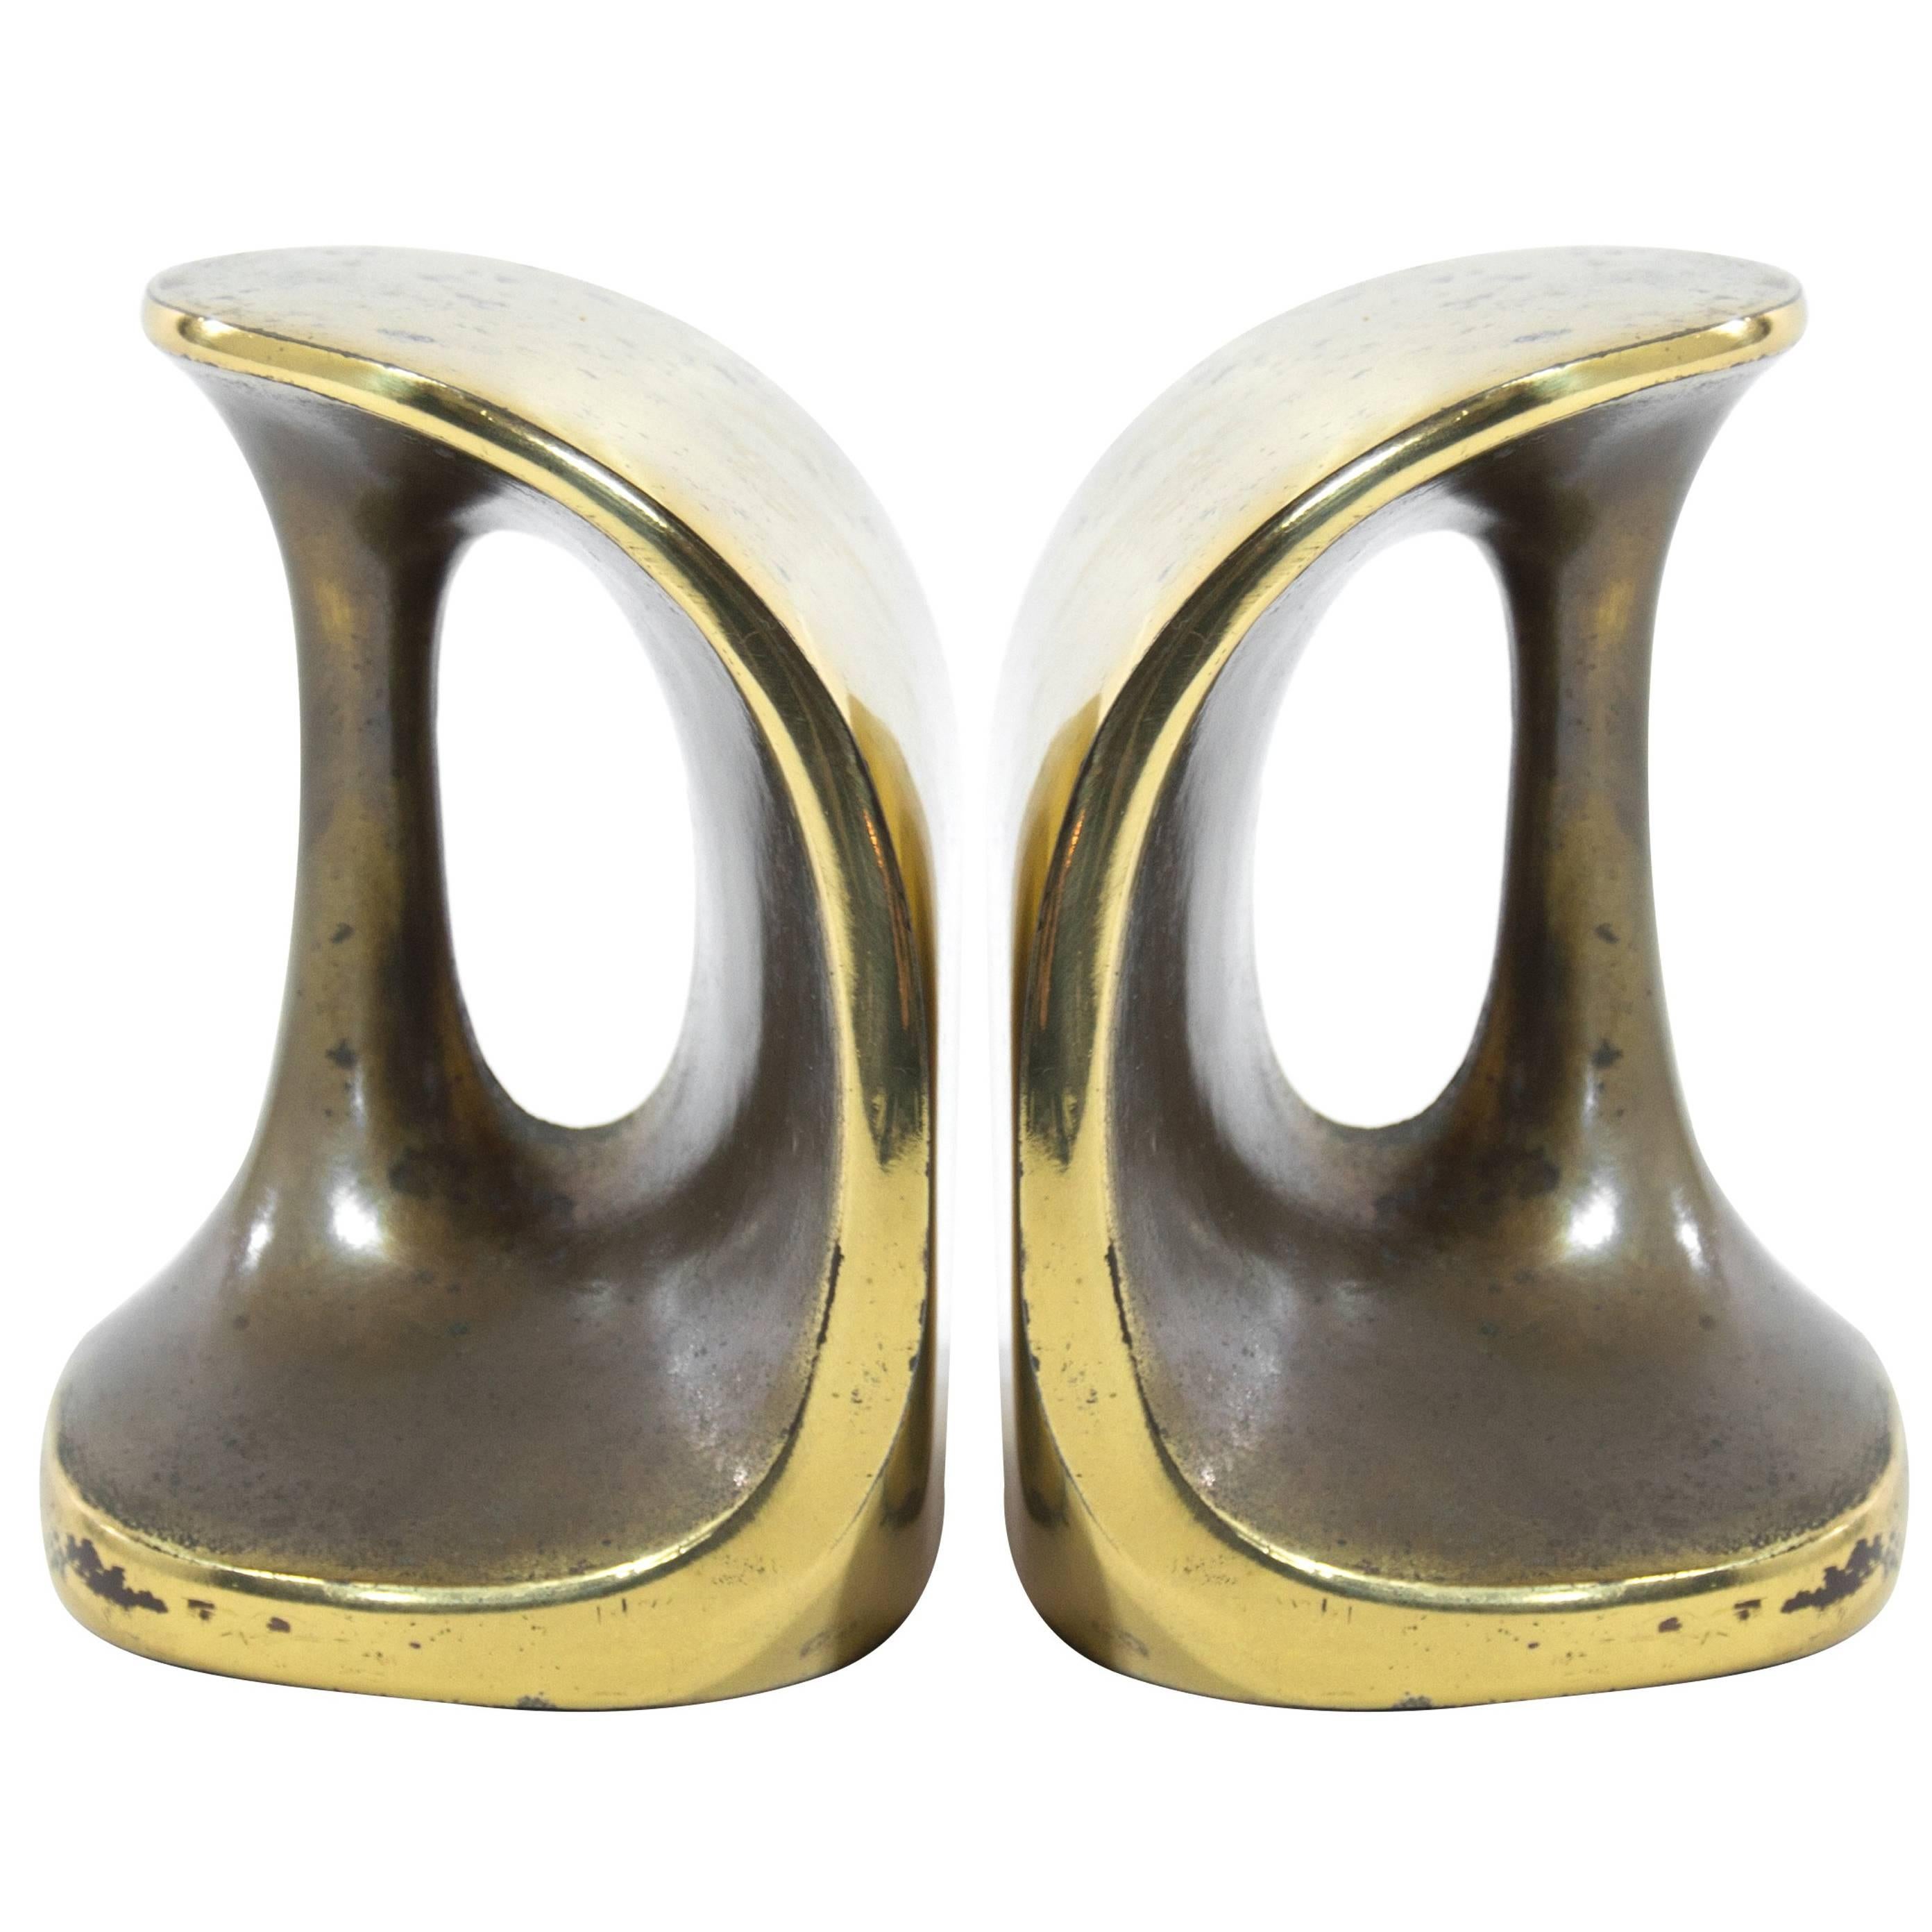 Patinated Brass Bookends by Ben Seibel for Jenfred Ware